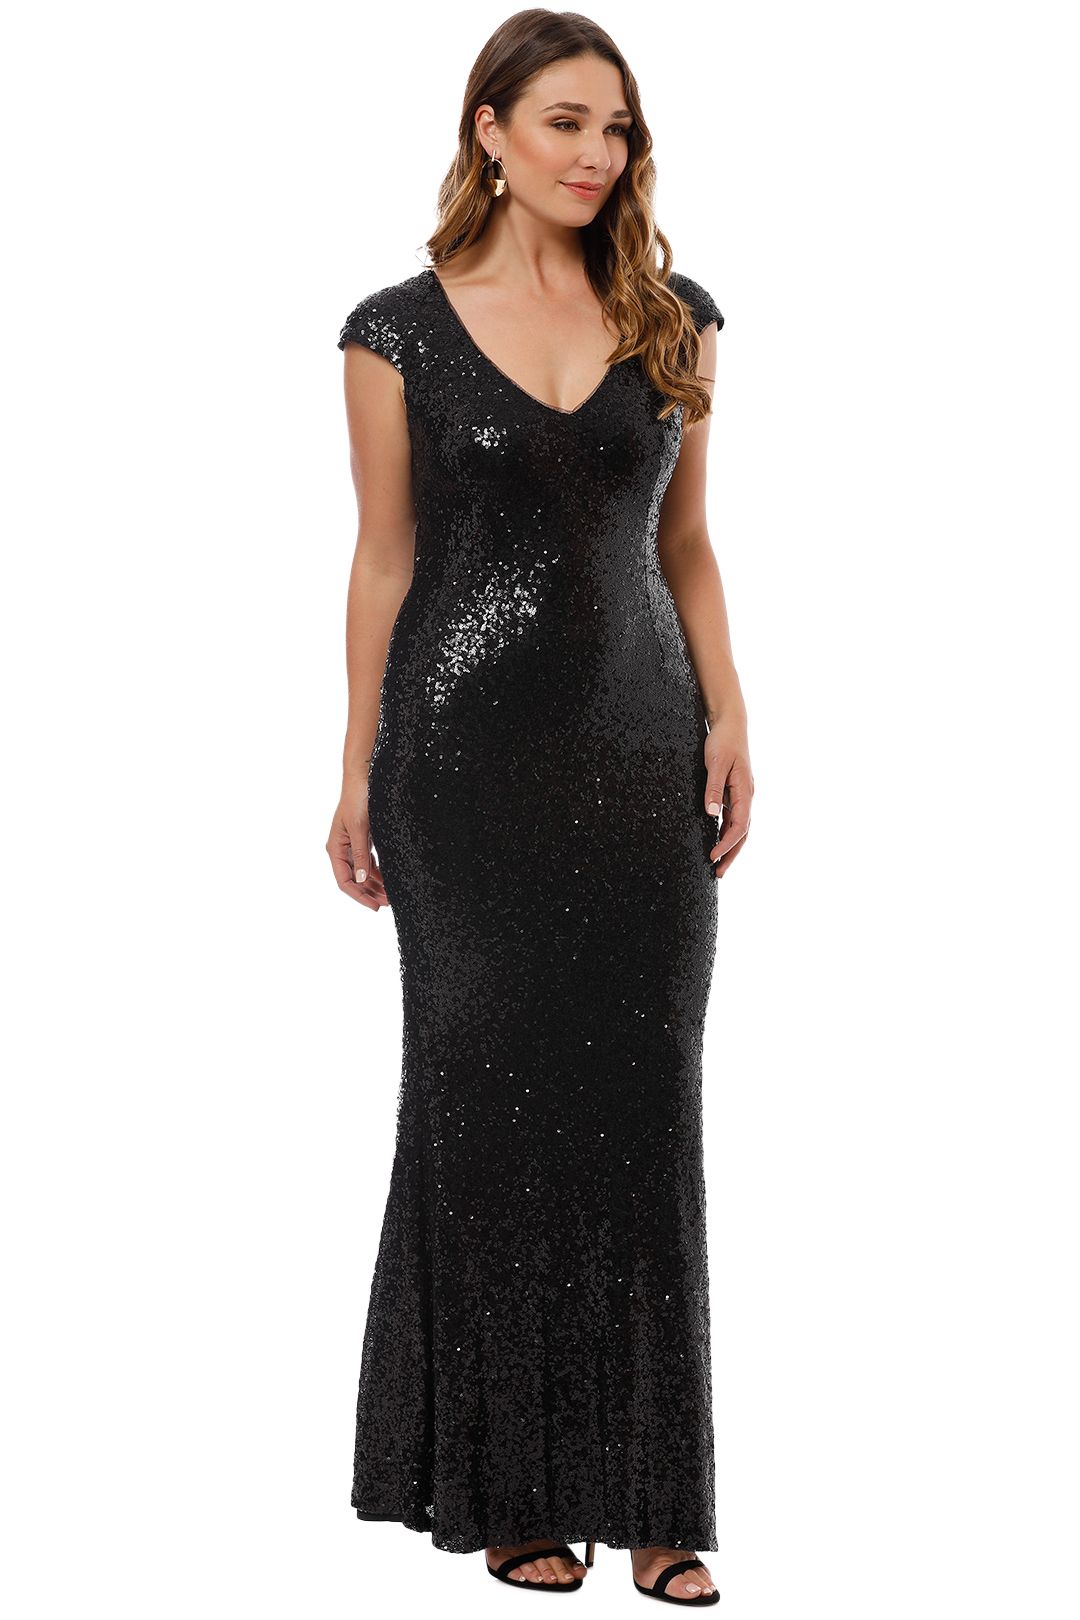 Kaylee Gown in Black by Theia for Hire | GlamCorner